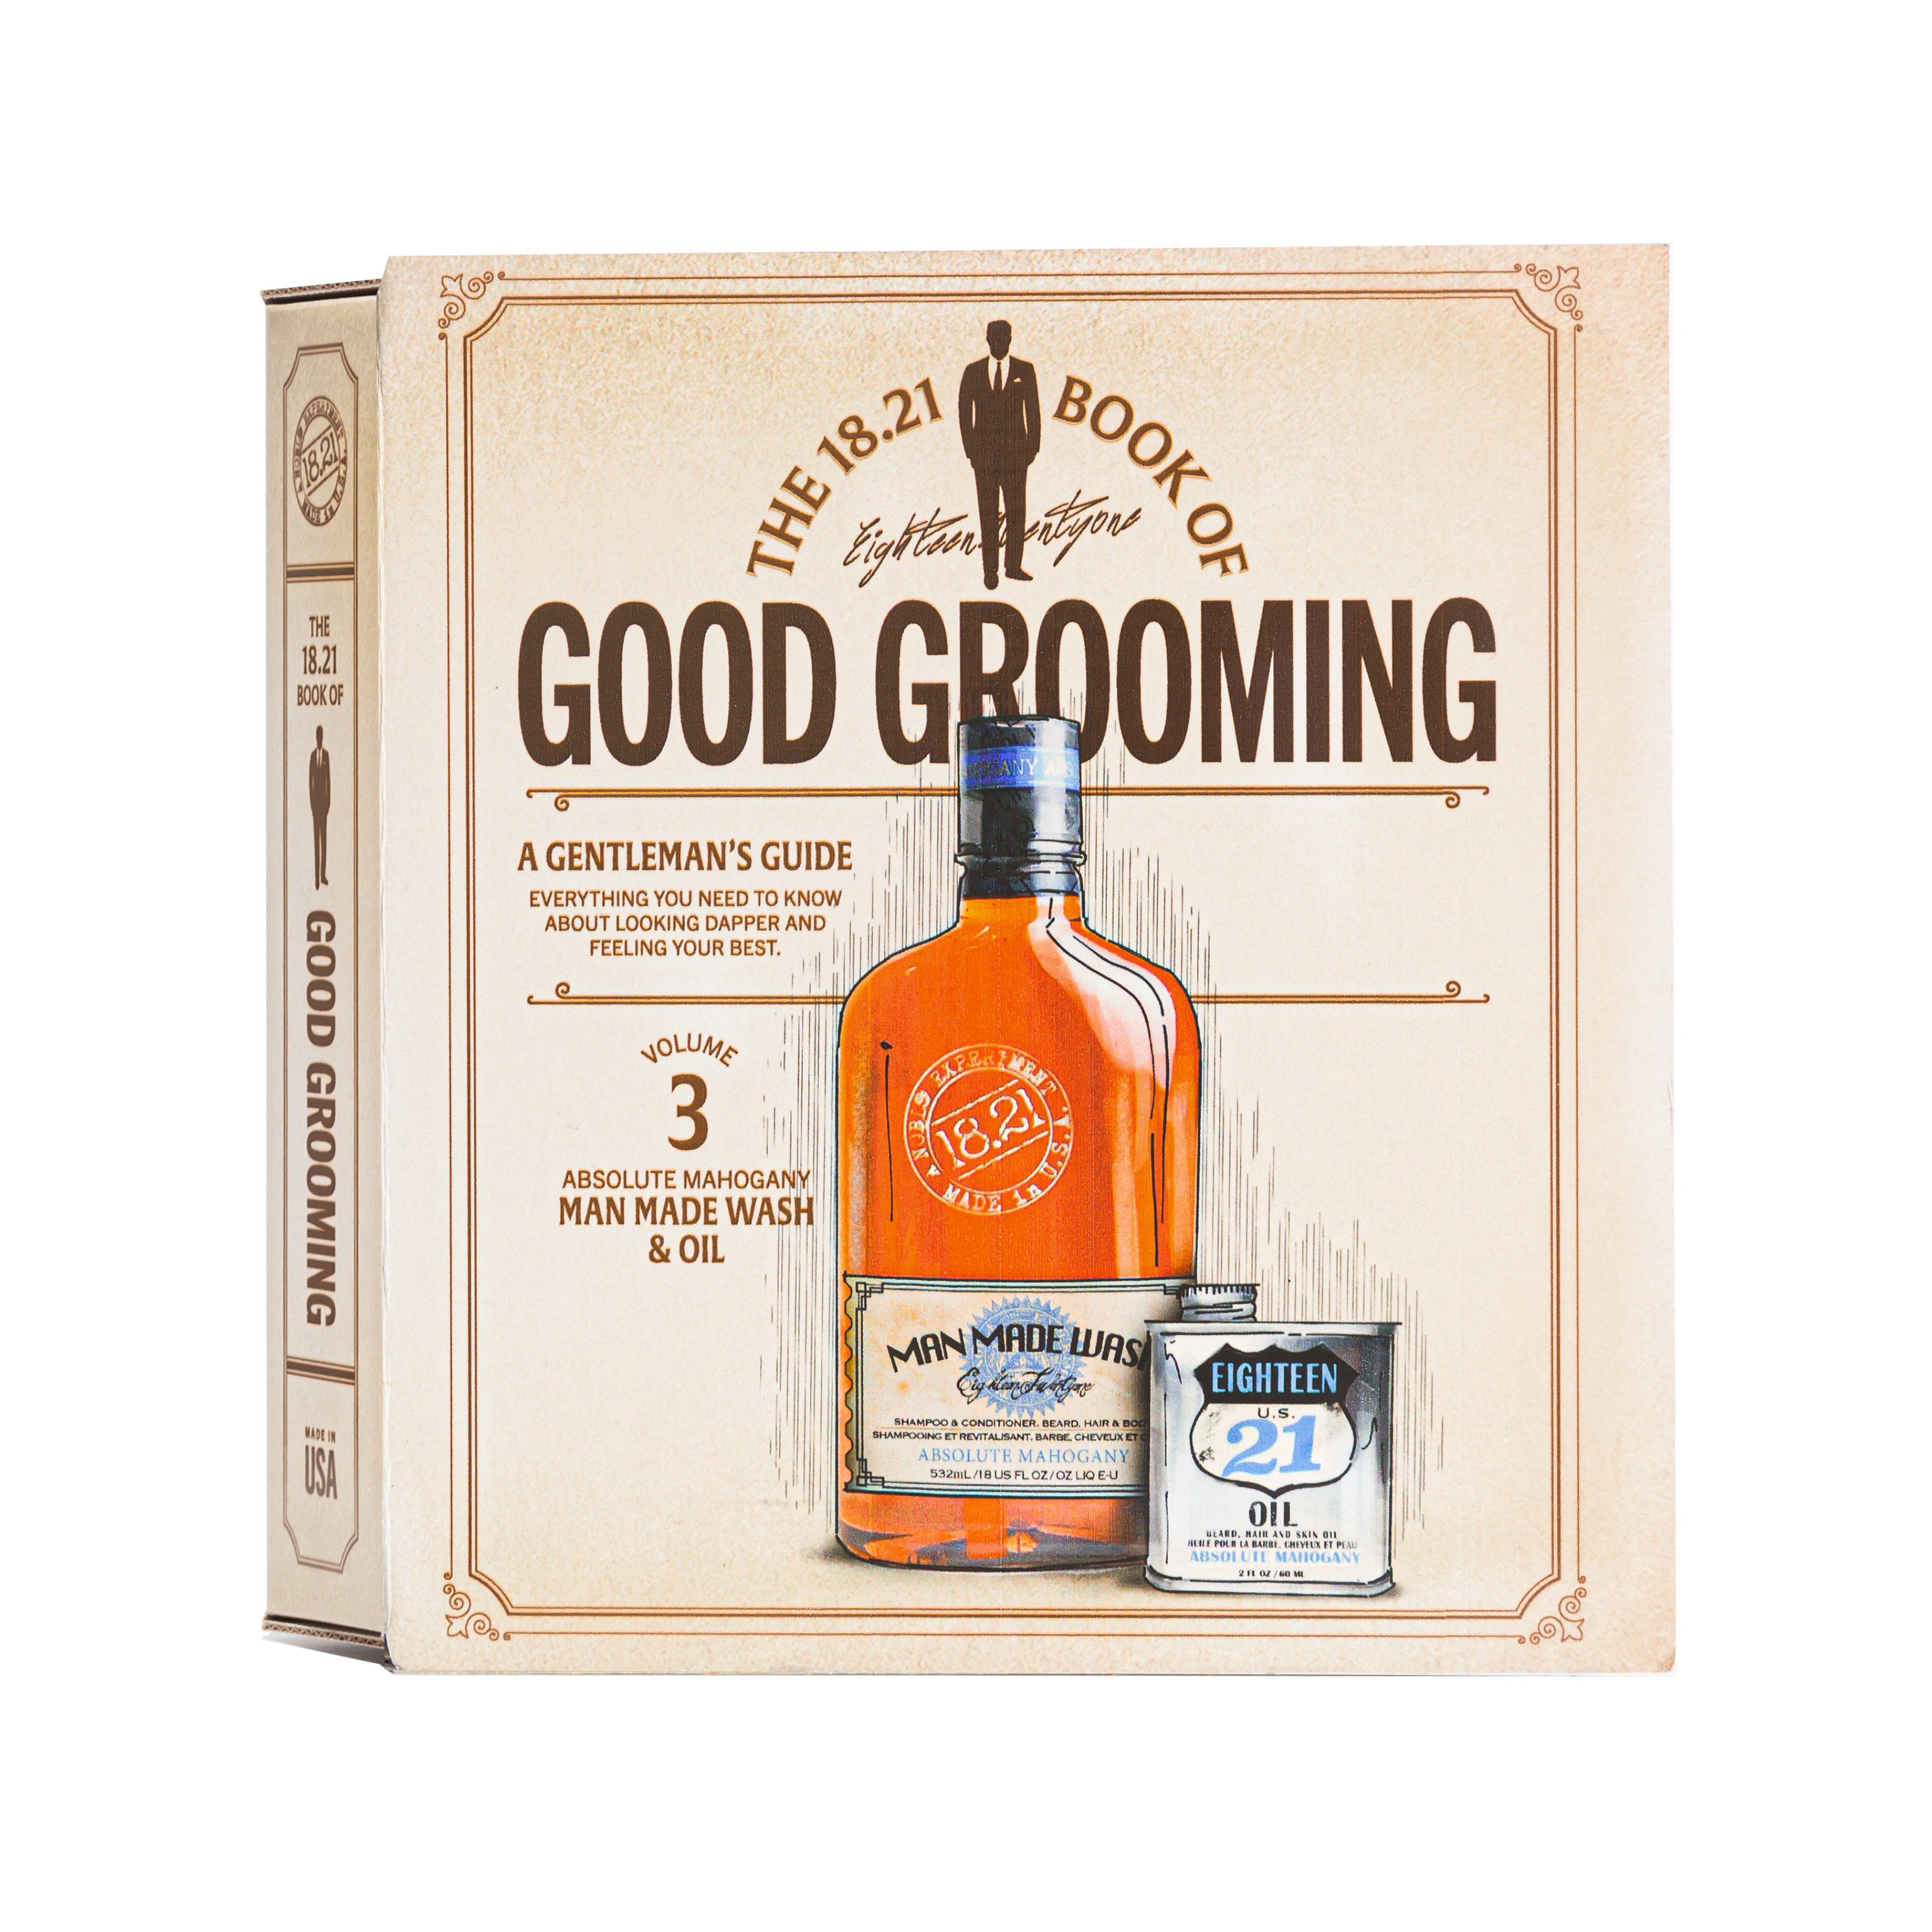 18.21 Man Made Book of Good Grooming Volume 3: Man Made Wash 18oz //  Beard, Hair Skin Oil in Absolute Mahogany Scent.